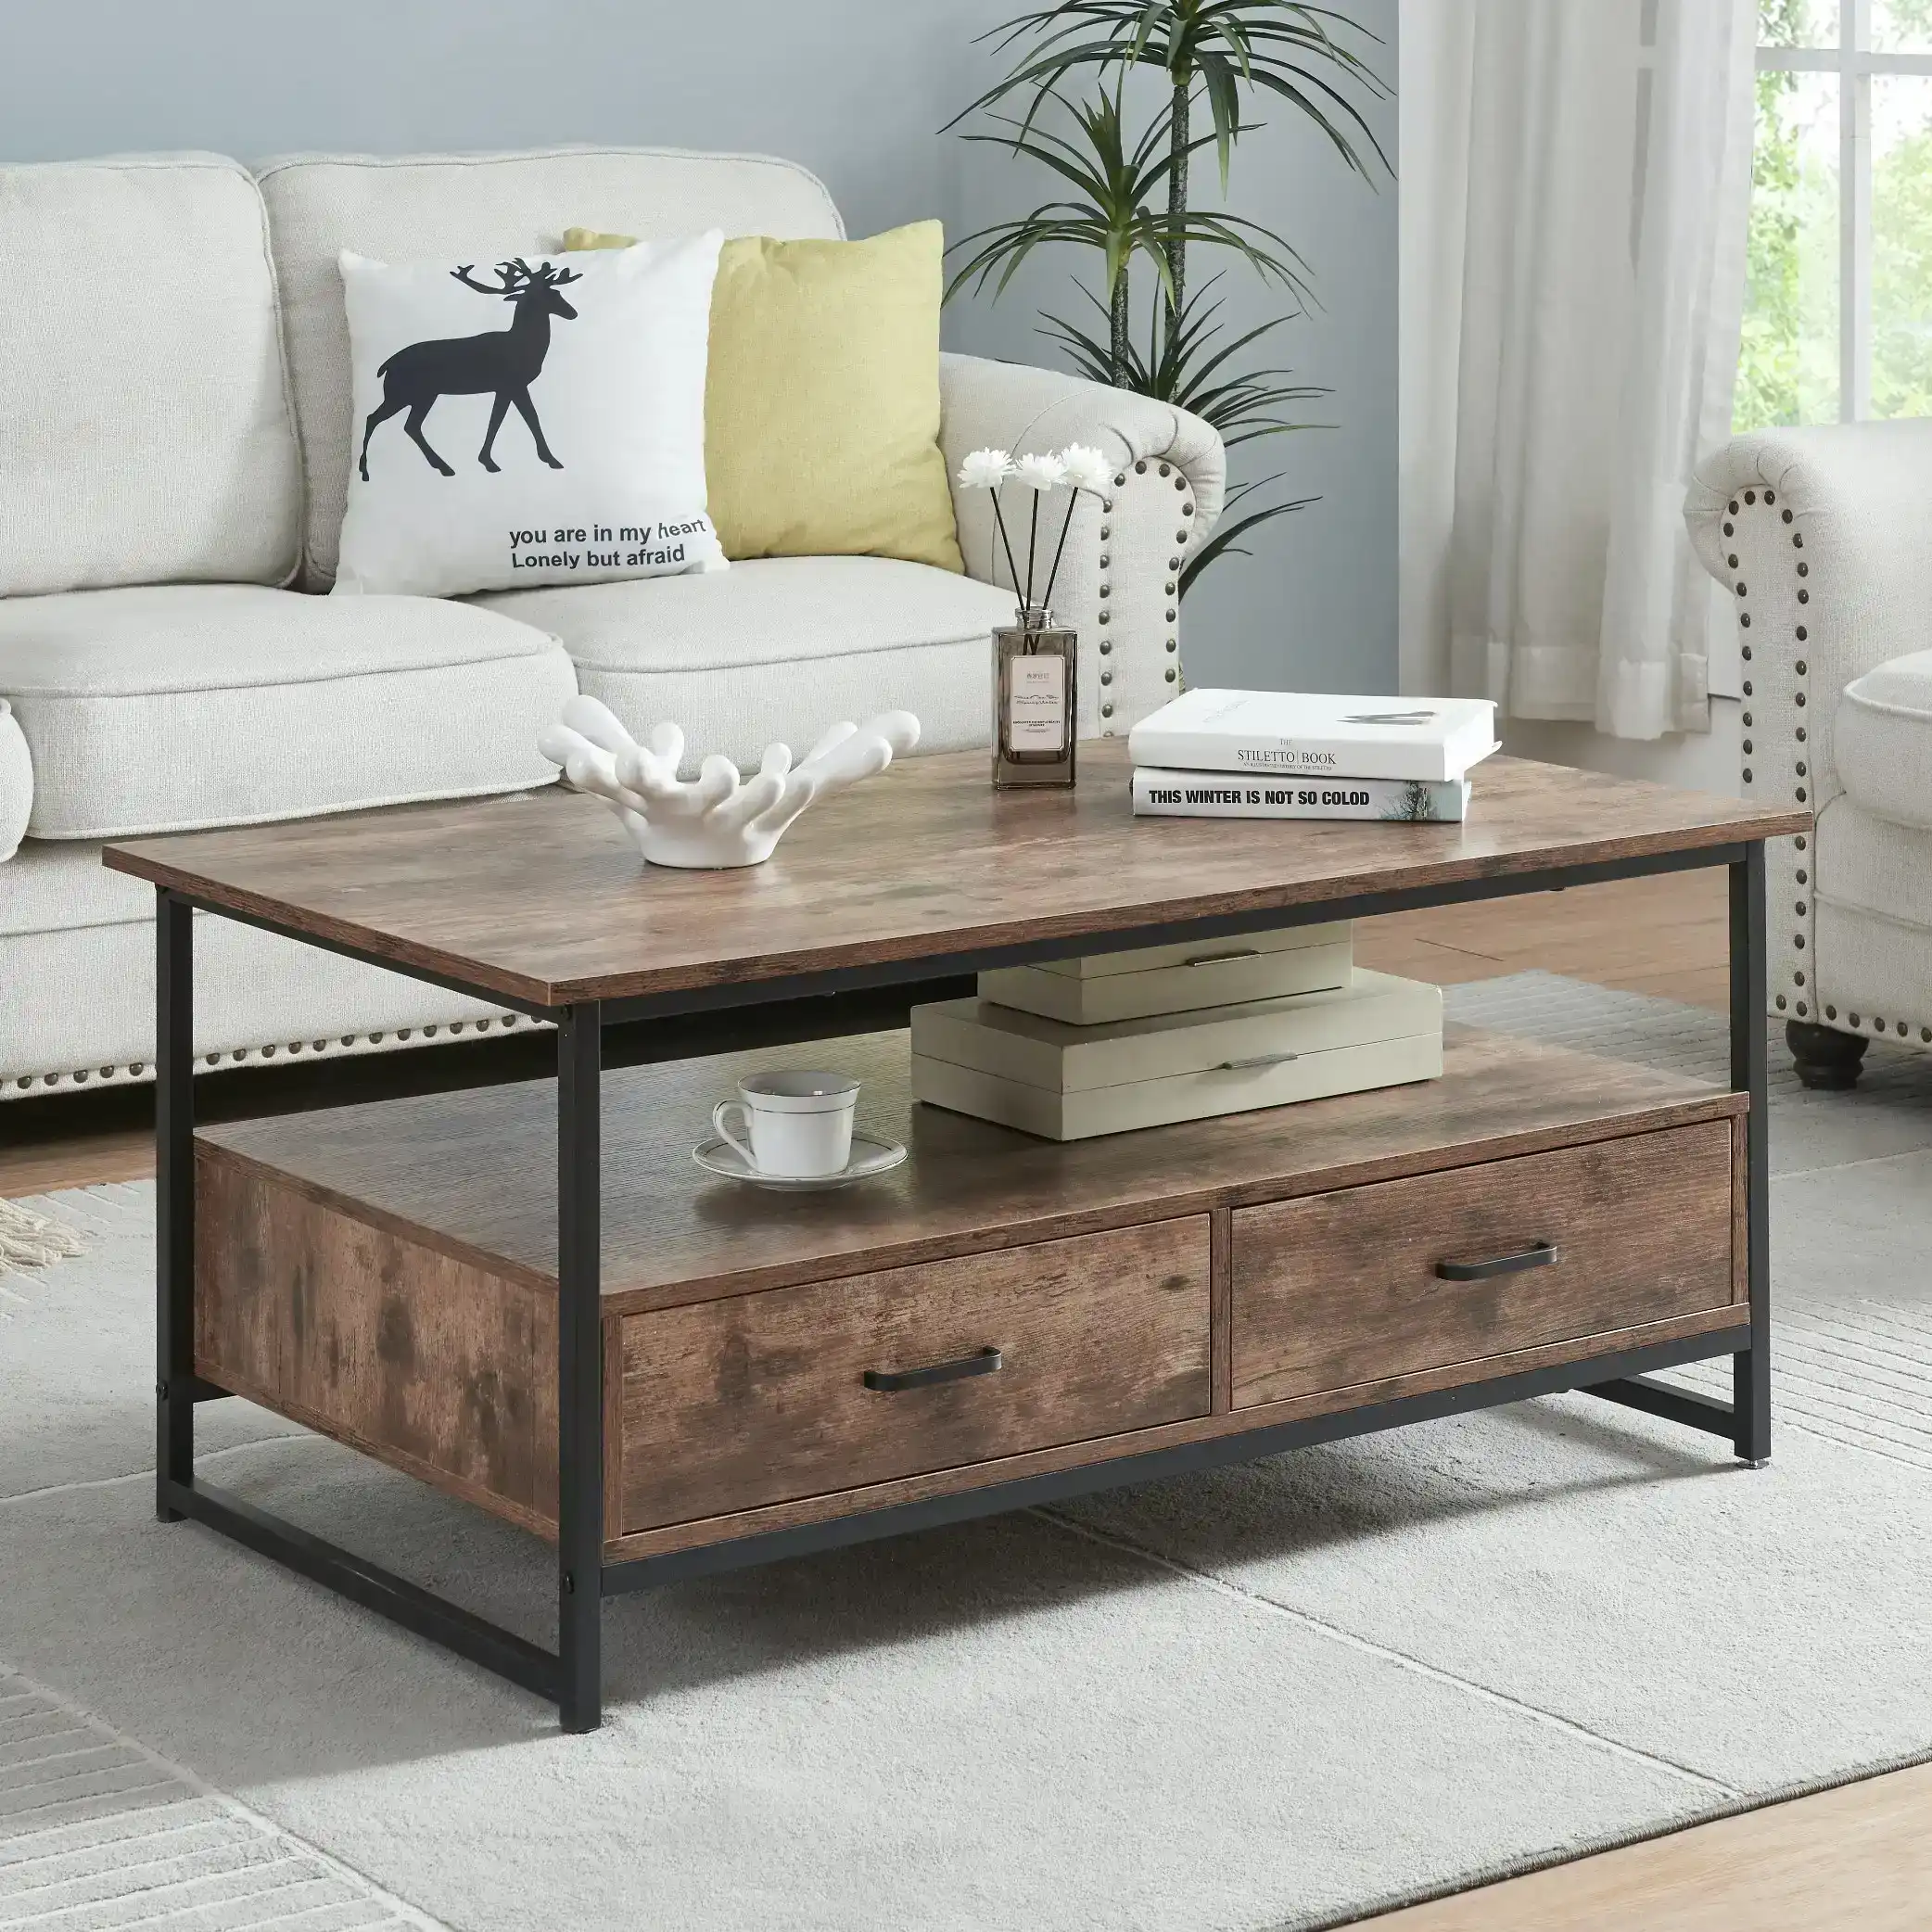 HLIVING Rectangular Farmhouse Coffee Table with Open Storage Shelves and 2 Drawers,Rustic Brown